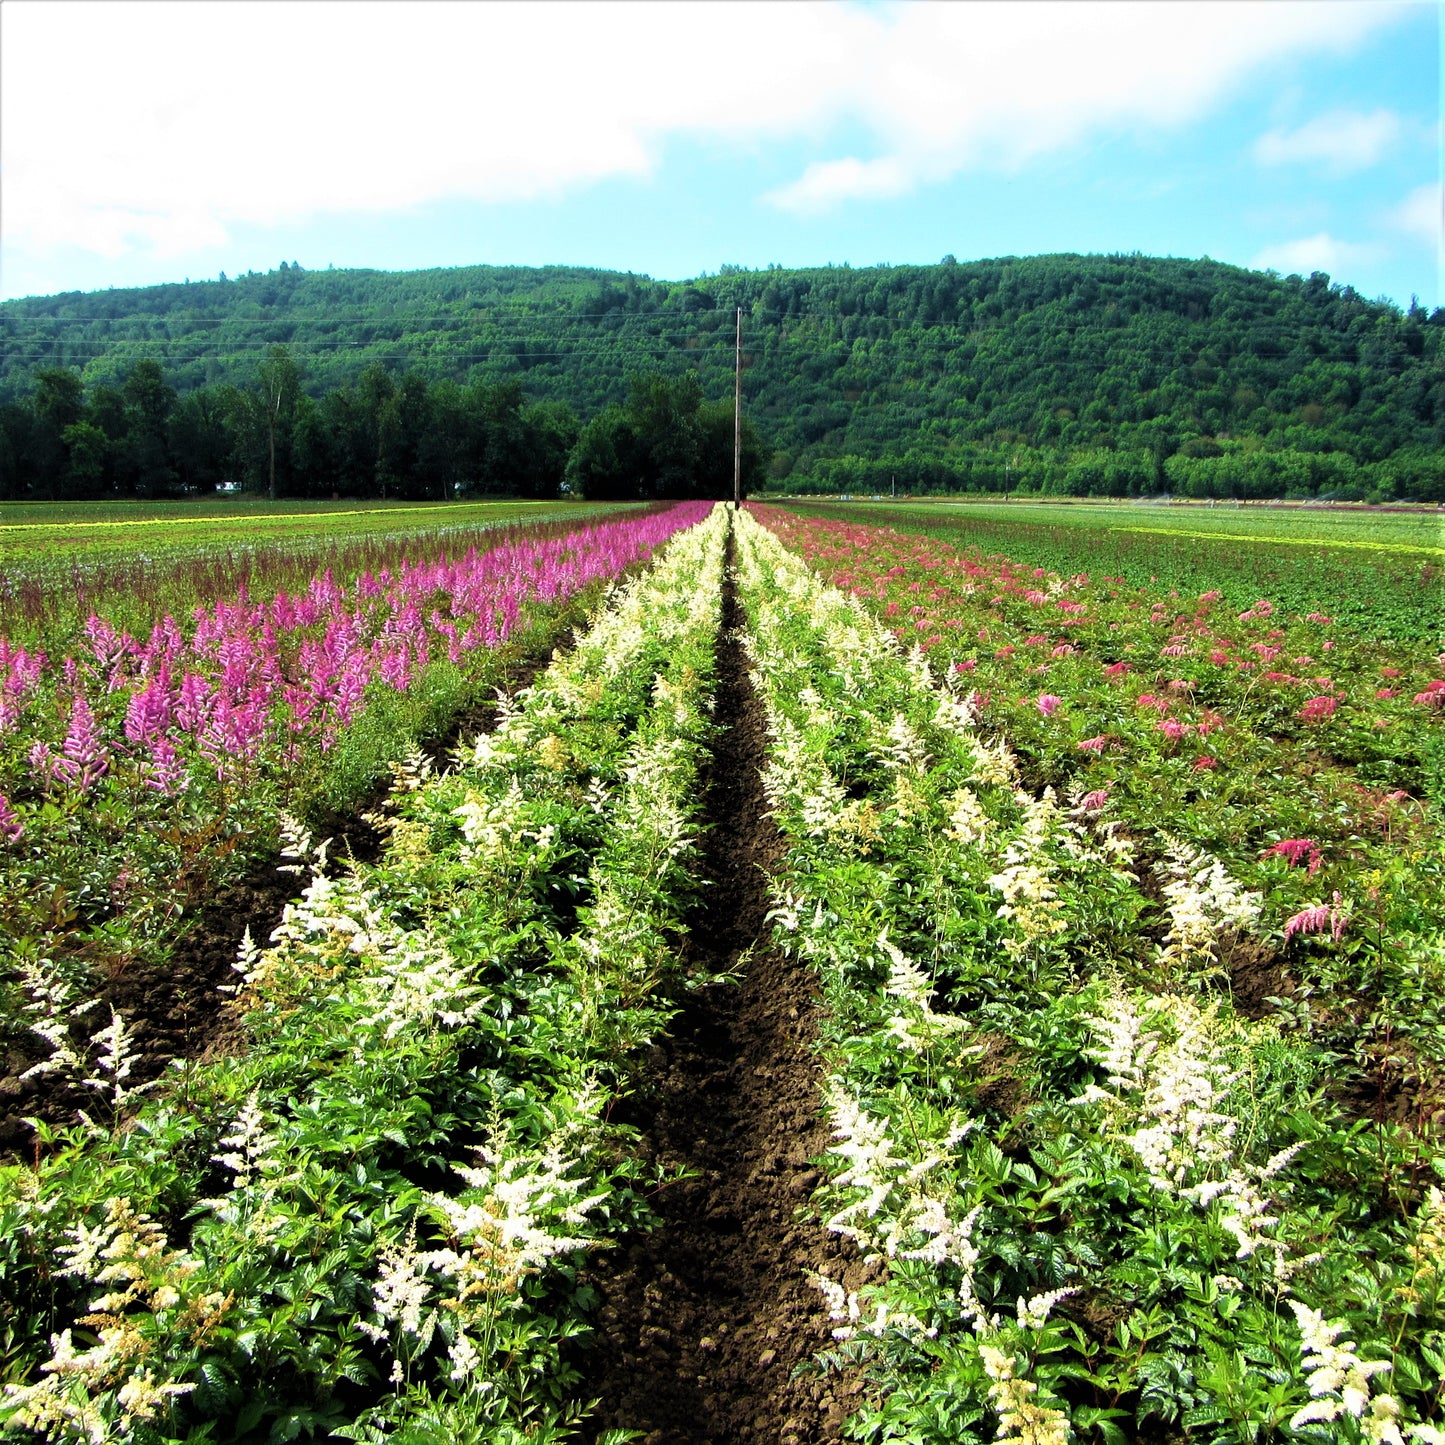 Rows Upon Rows of Blooming Astilbe Plants